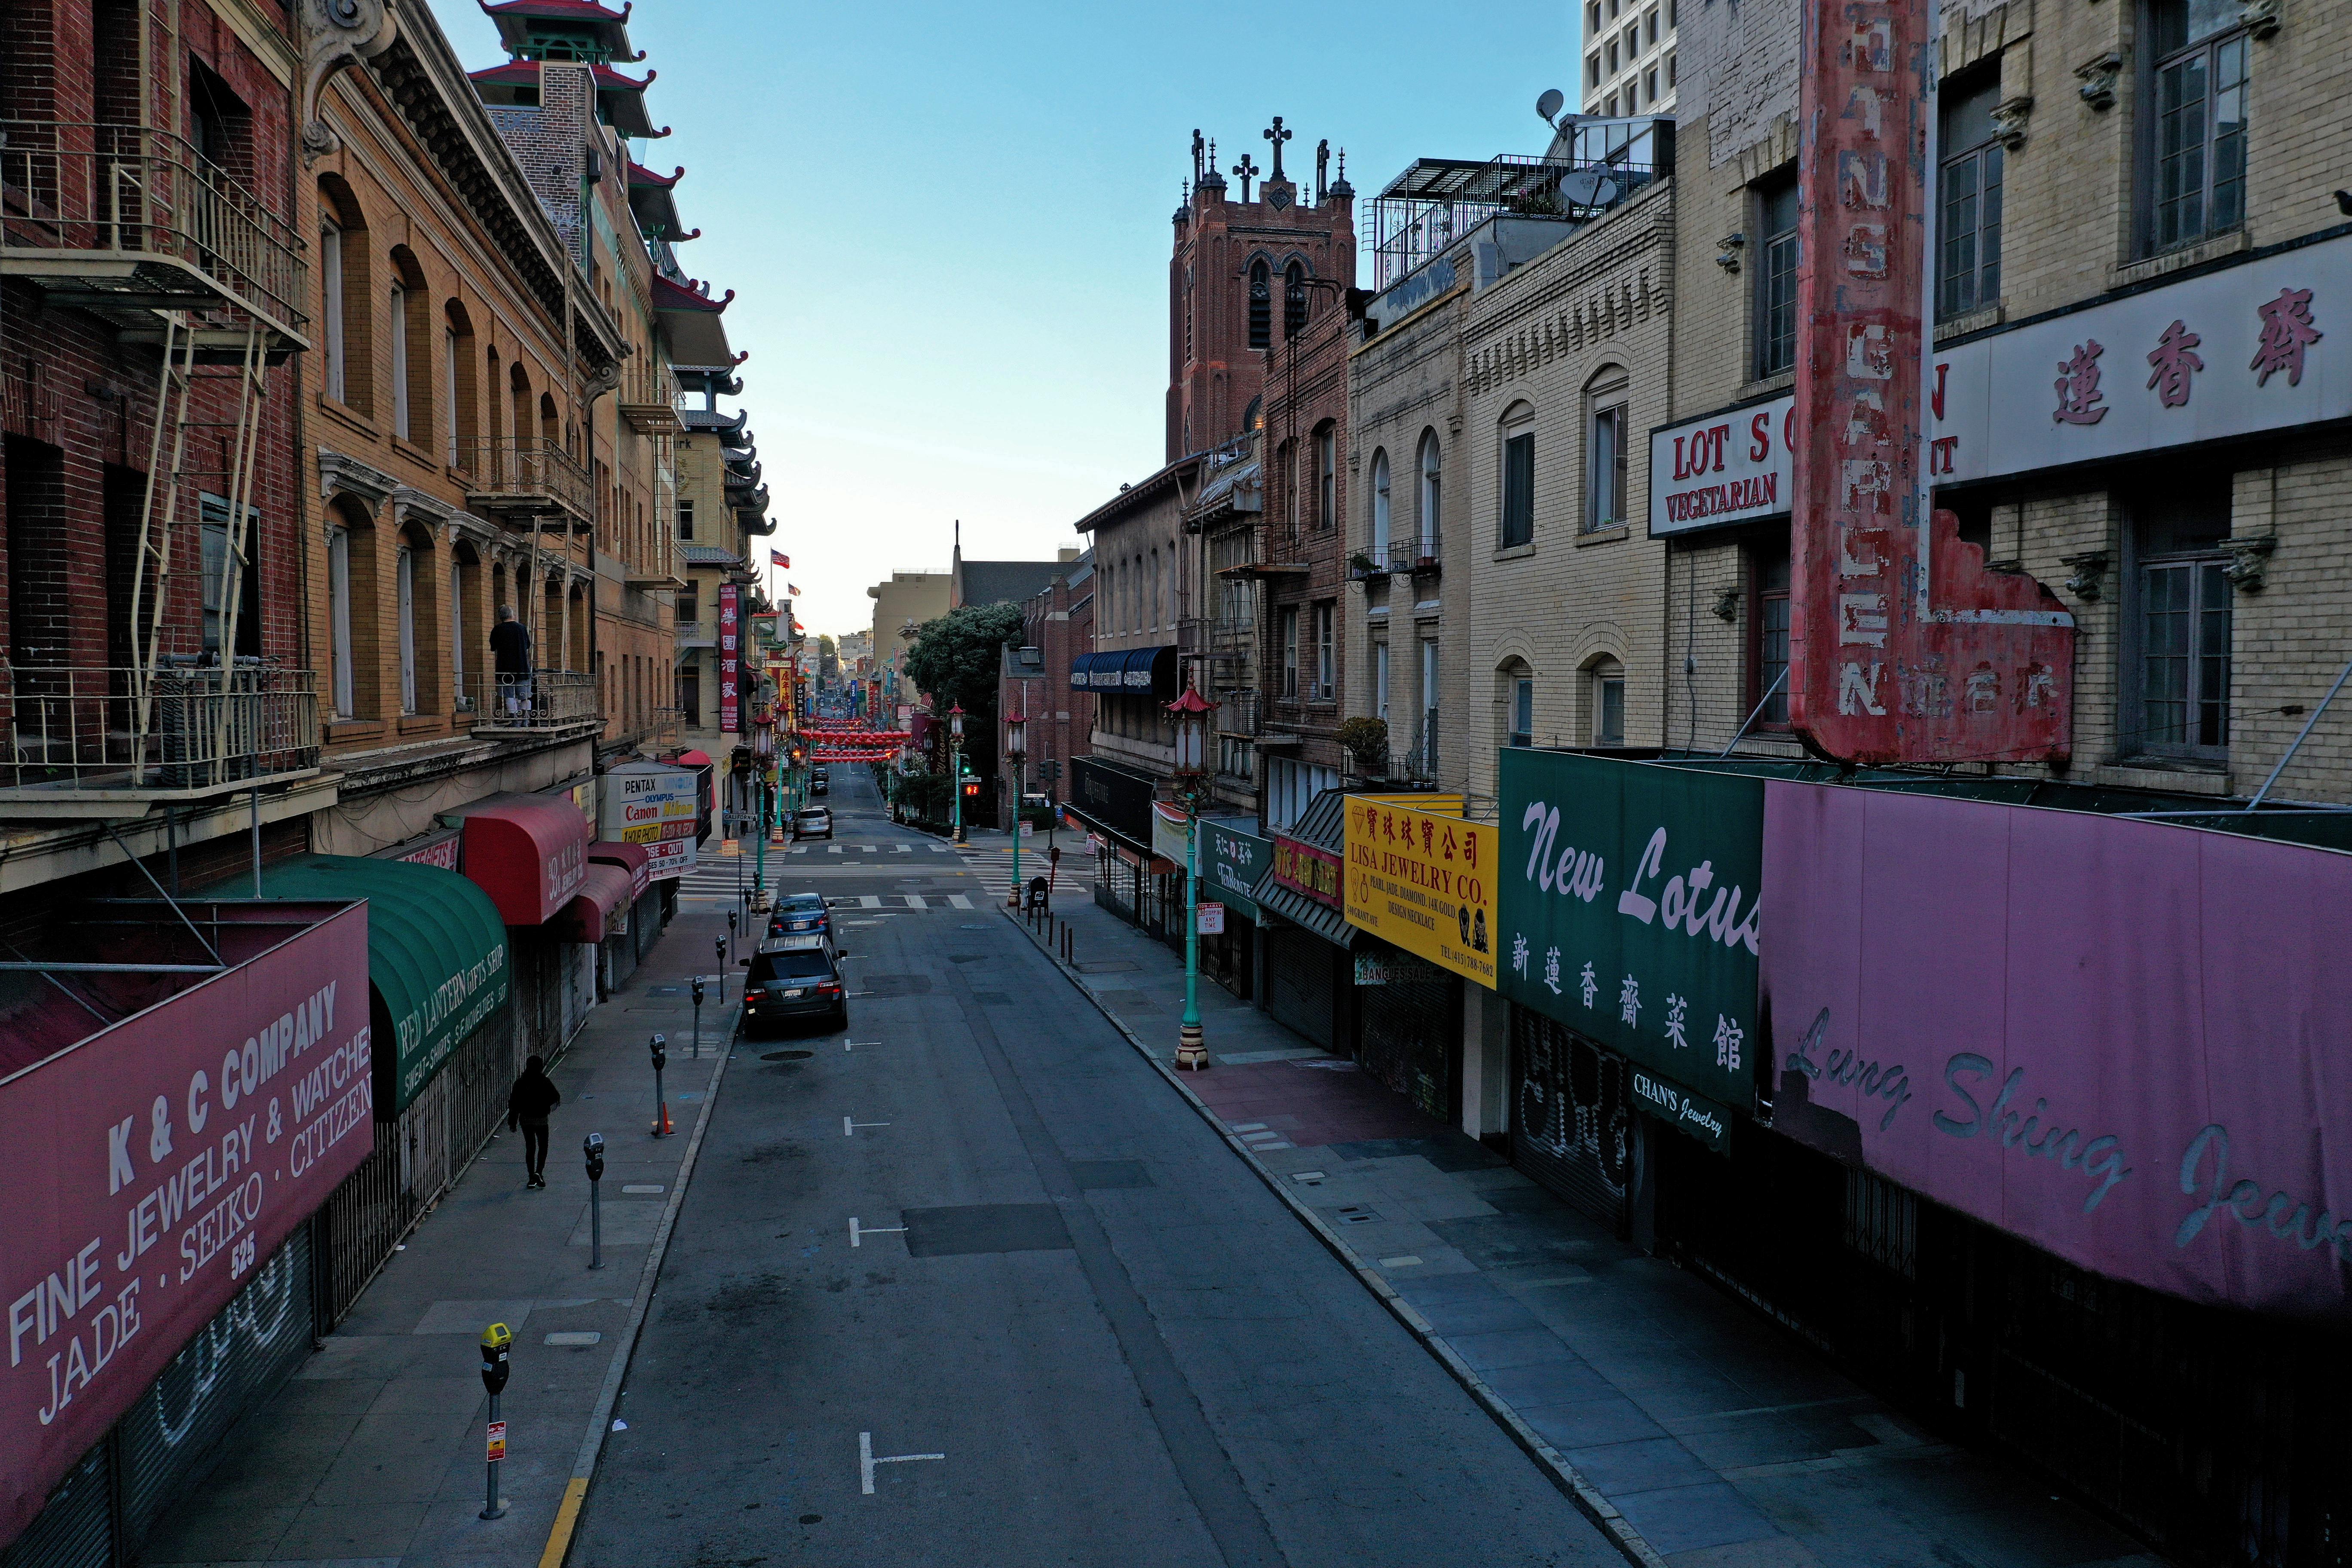 An empty street in San Francisco's Chinatown.